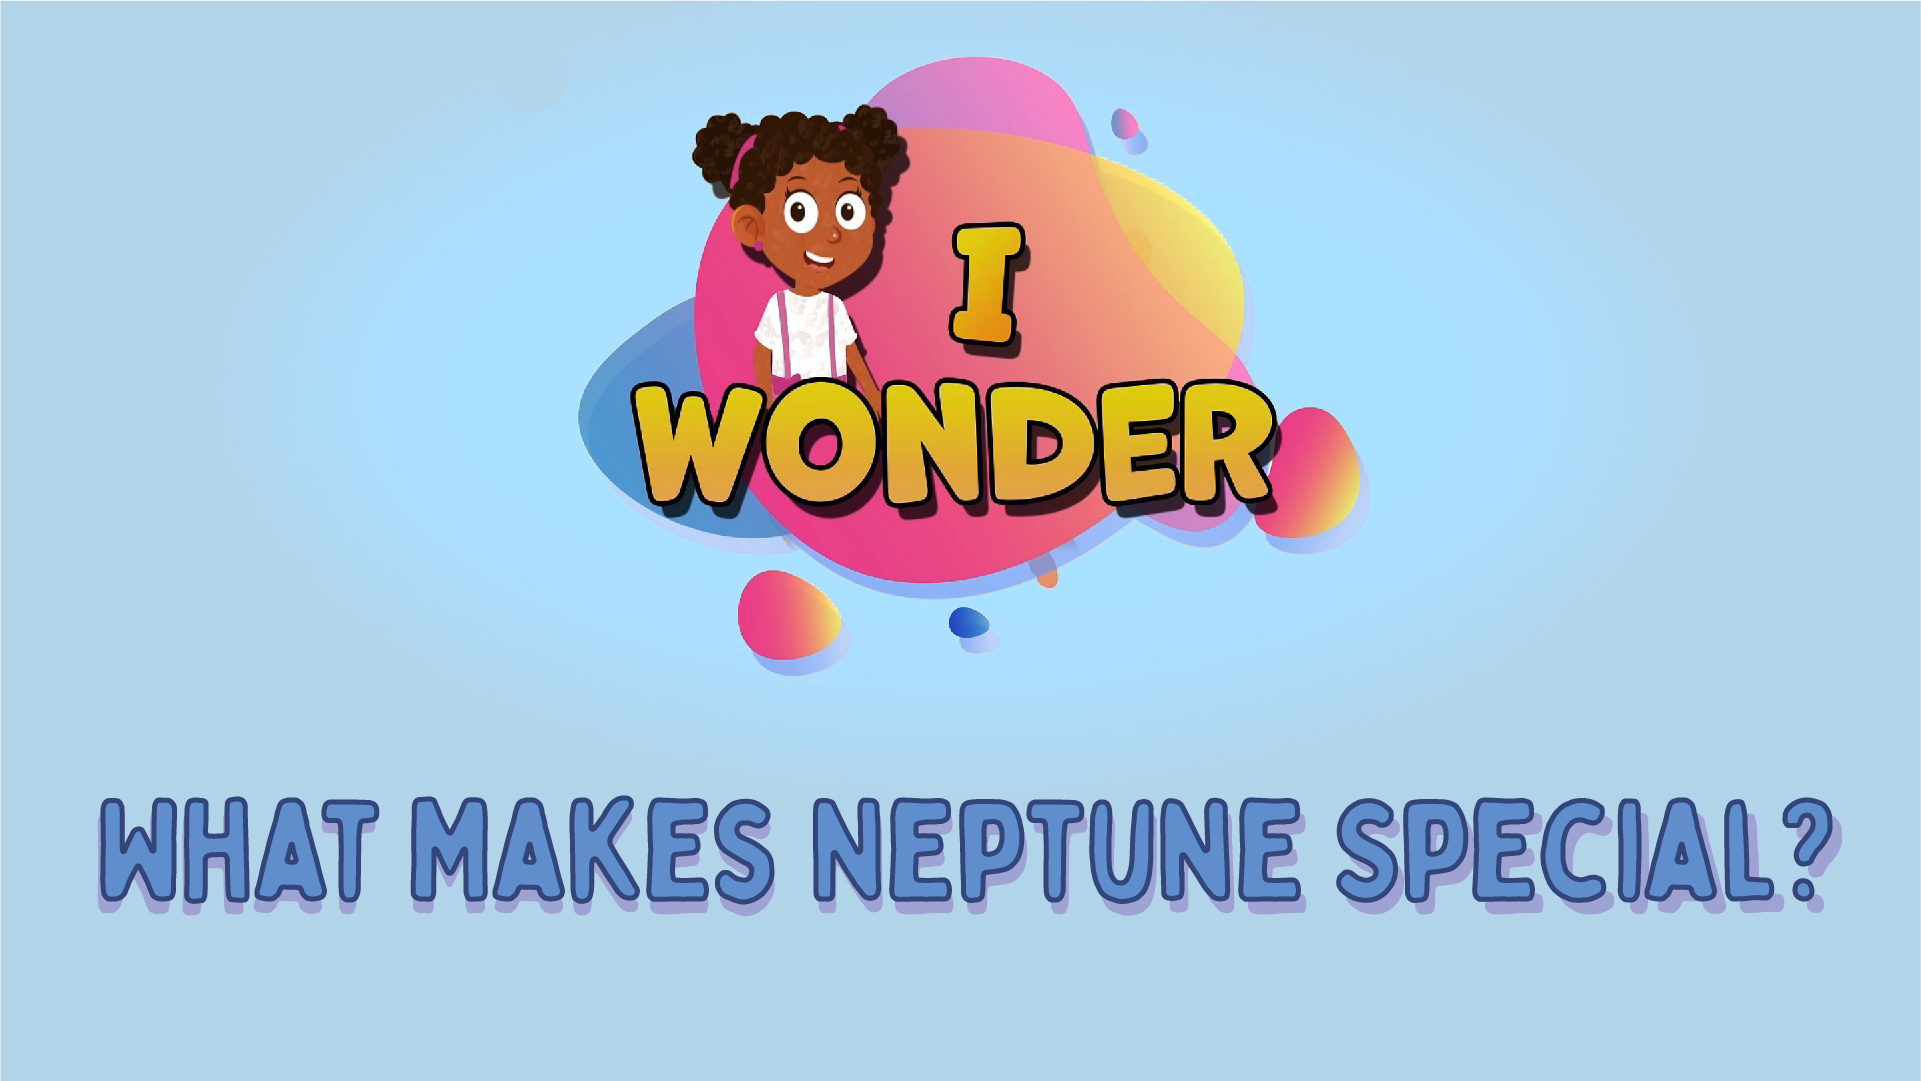 What Makes Neptune Special?